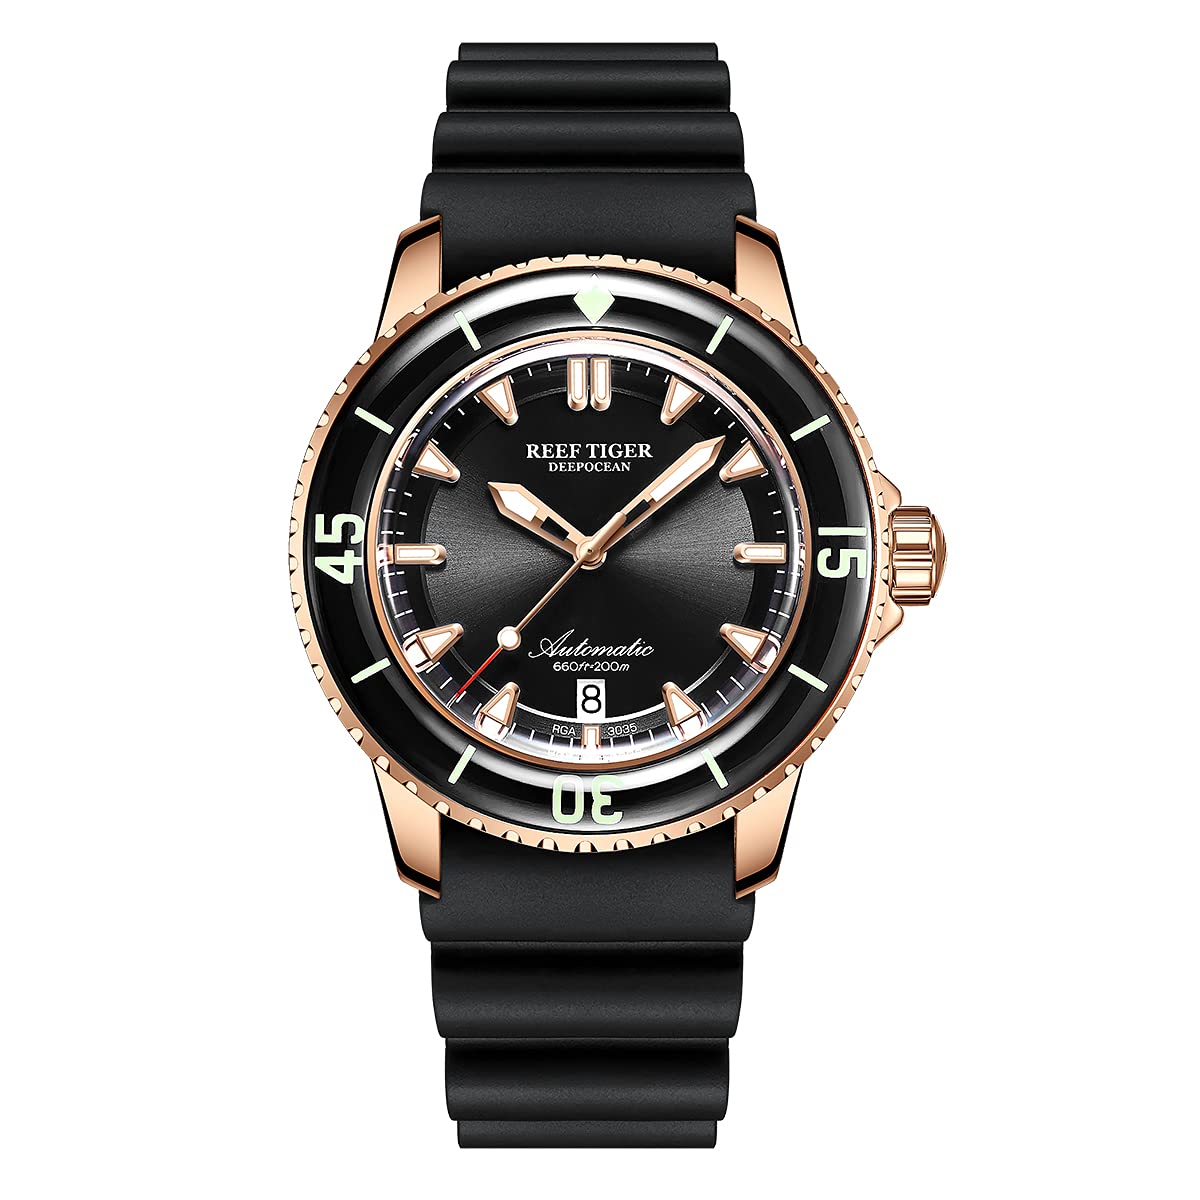 REEF TIGER Mens Mechanical Dive Watches Rose Gold Rubber Strap Watches Luminous Watch RGA3035